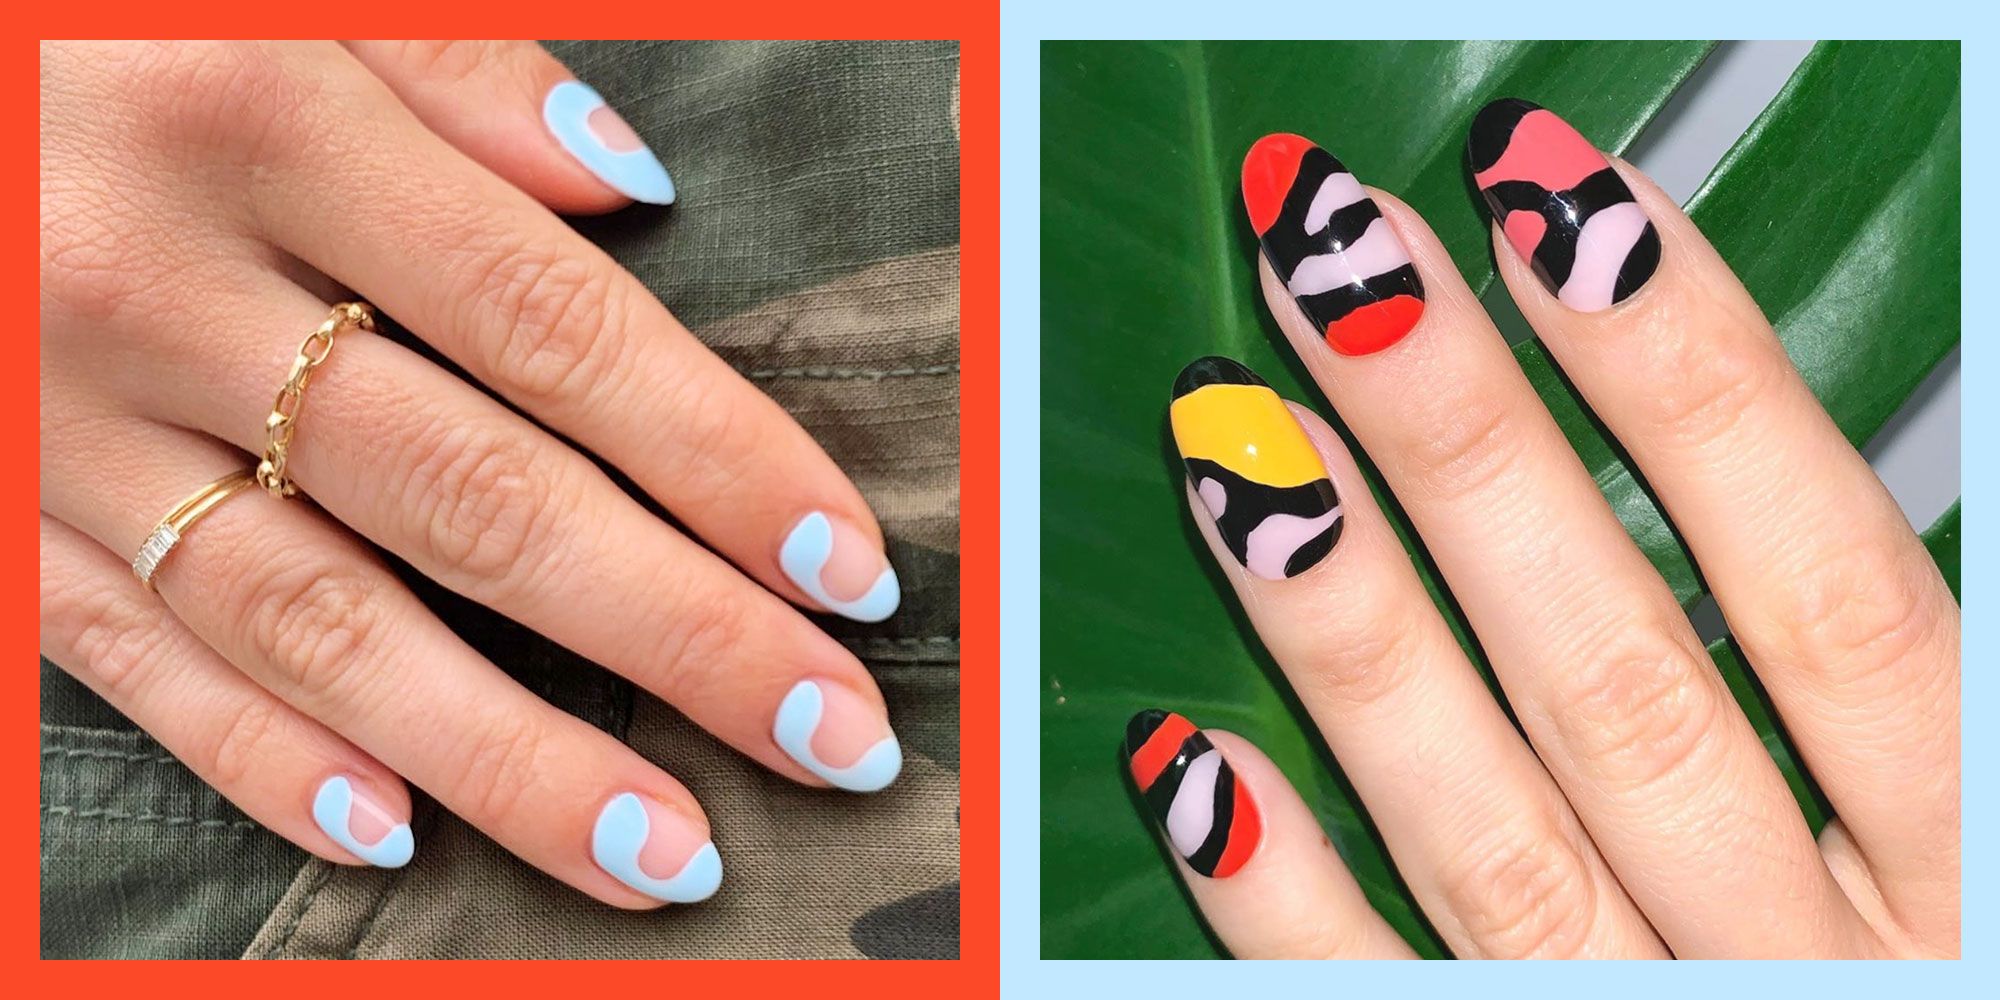 The Logomania Manicure Is The Newest Nail Art Trend Taking Over